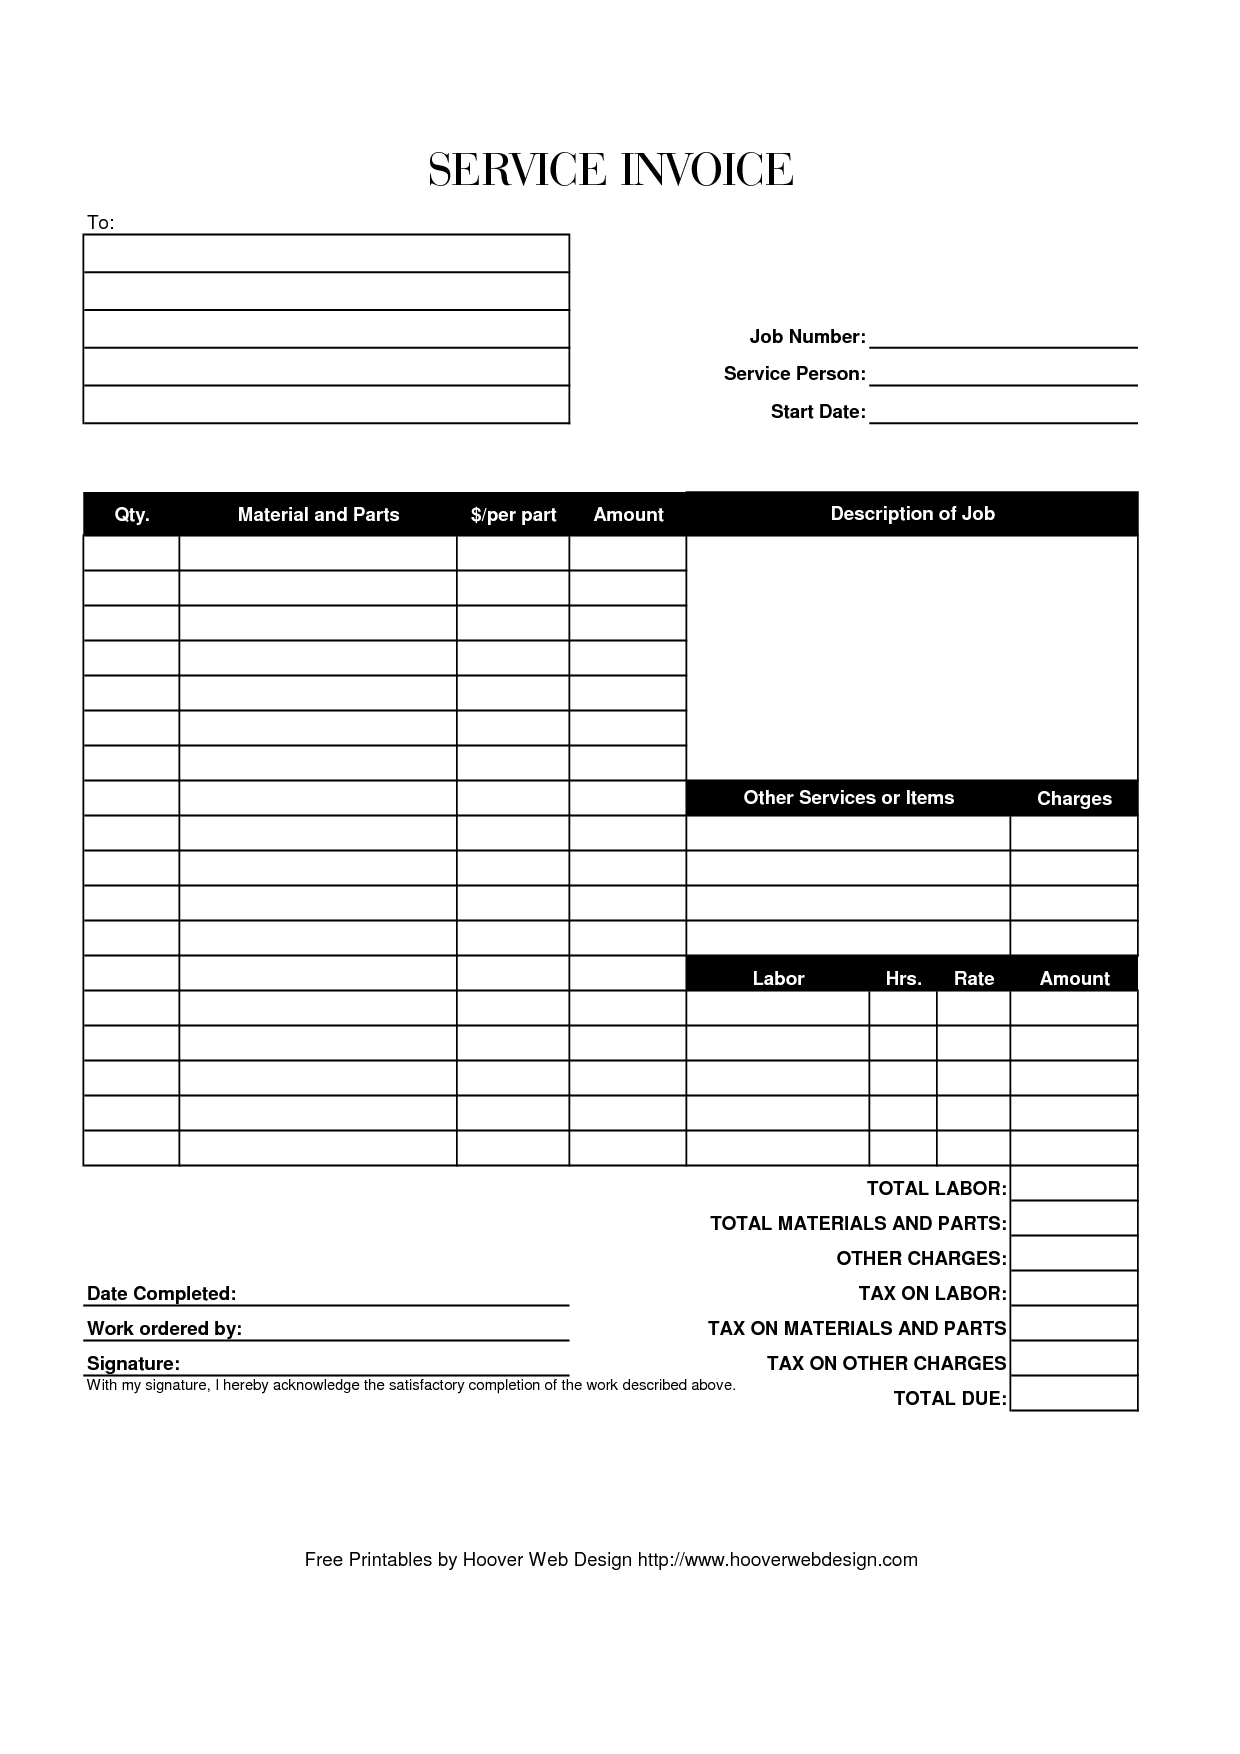 free-bill-invoice-template-printable-printable-free-templates-download